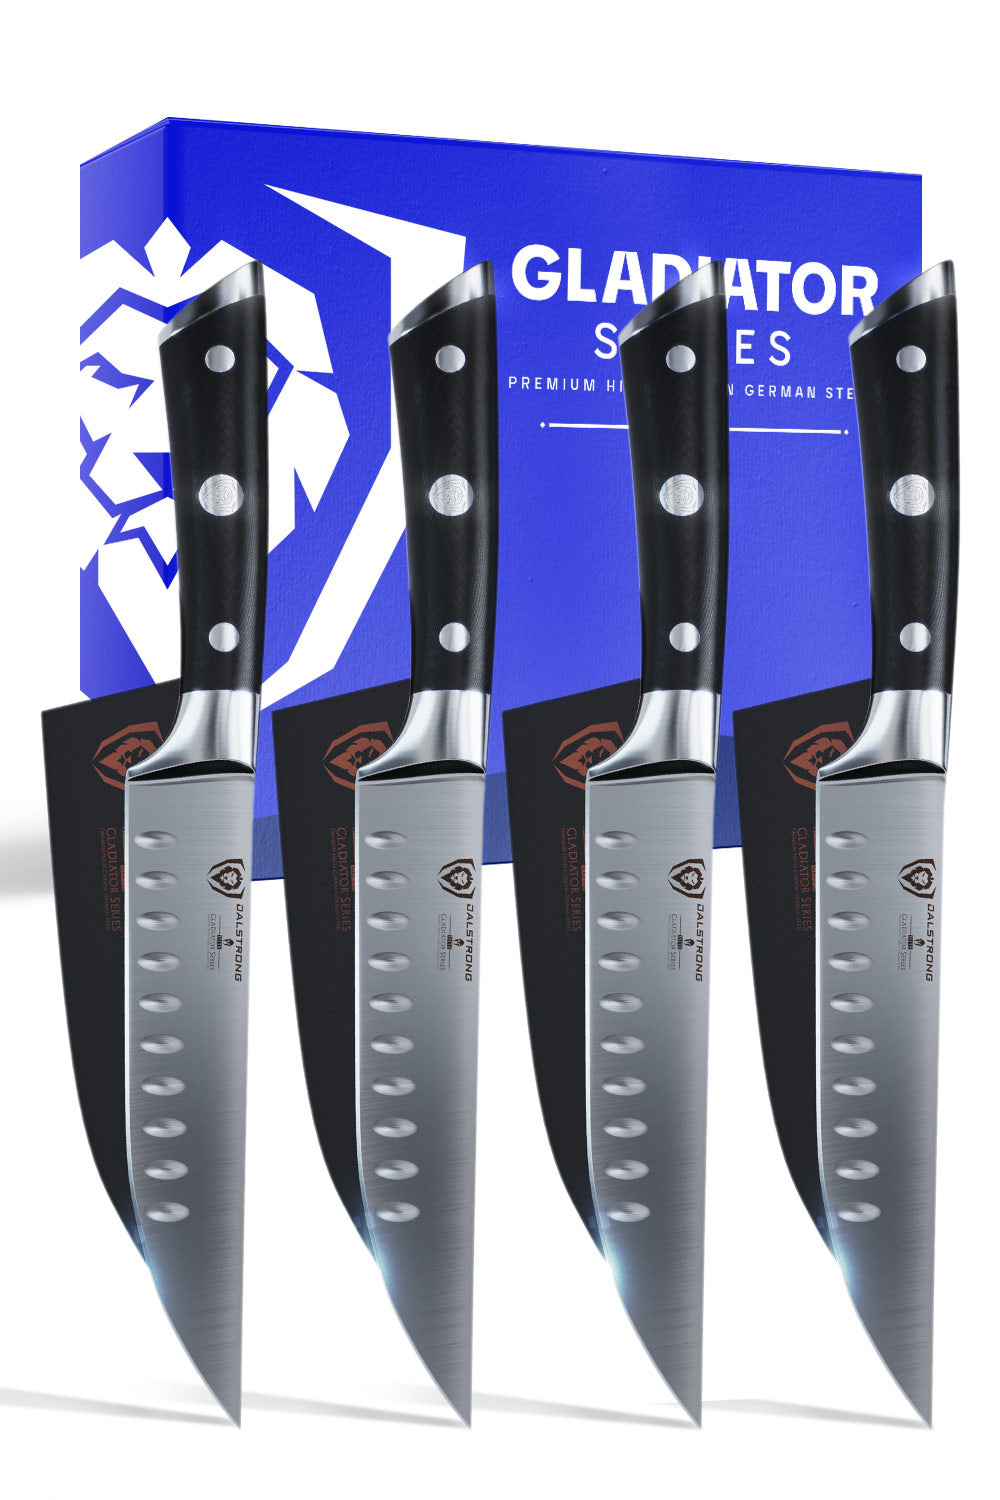 Dalstrong gladiator series 4 piece steak knife set with black handles in front of it's premium packaging.